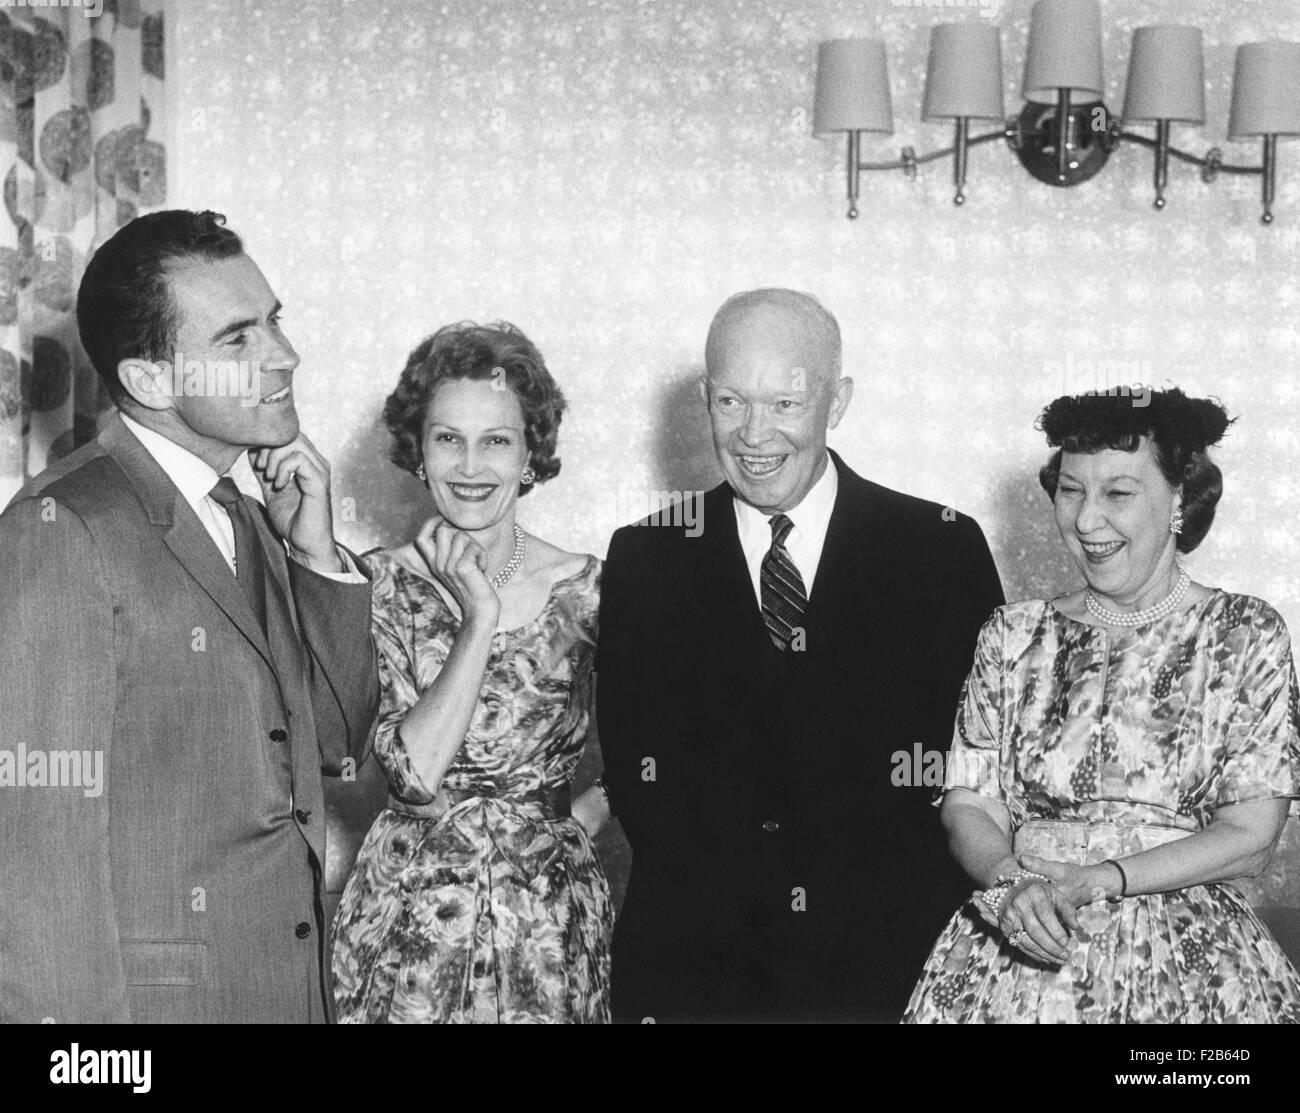 Vice President and Republican Nominee for President Richard Nixon adjusting his collar. Pat Nixon, President and Mamie Eisenhower appear amused. Aug. 24, 1960. - (BSLOC 2014 16 131) Stock Photo